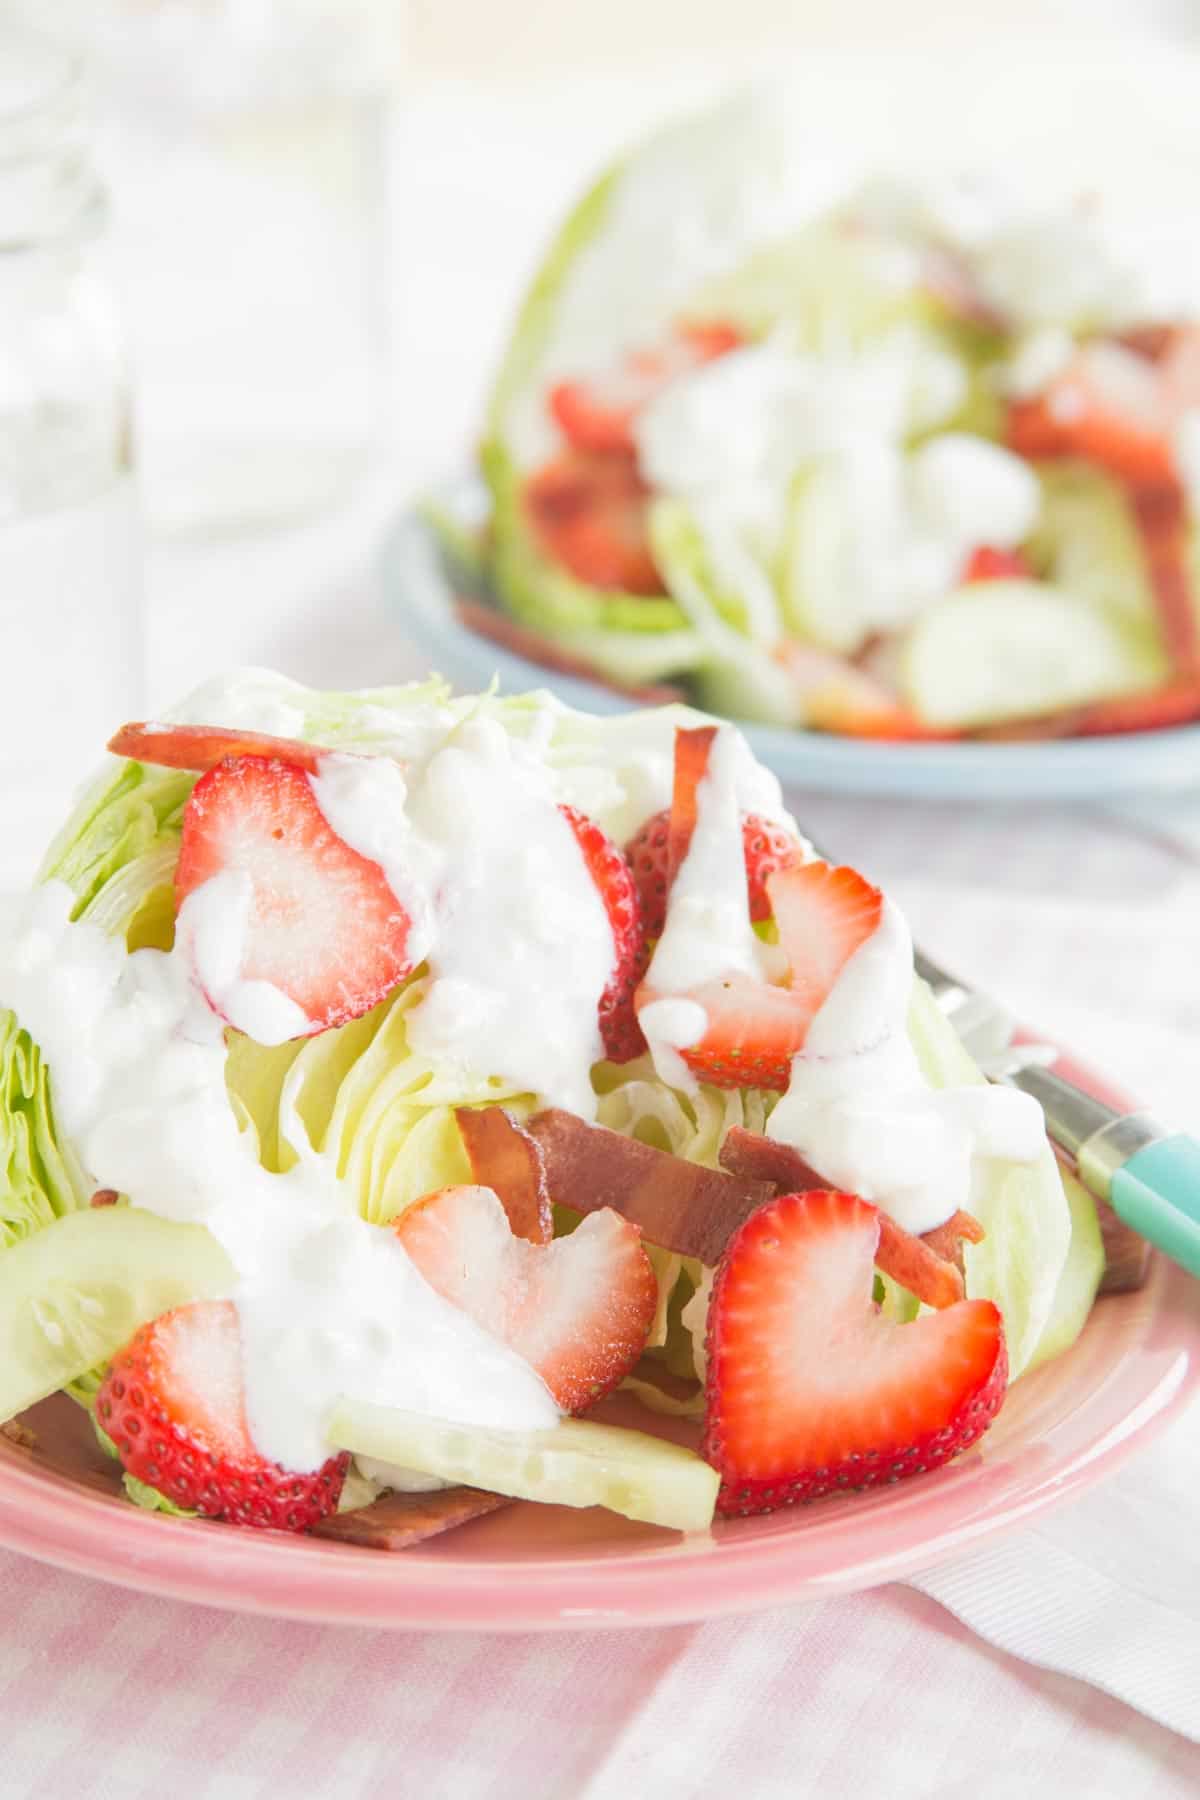 A strawberry wedge salad on a pink plate with another one blurred in the background.